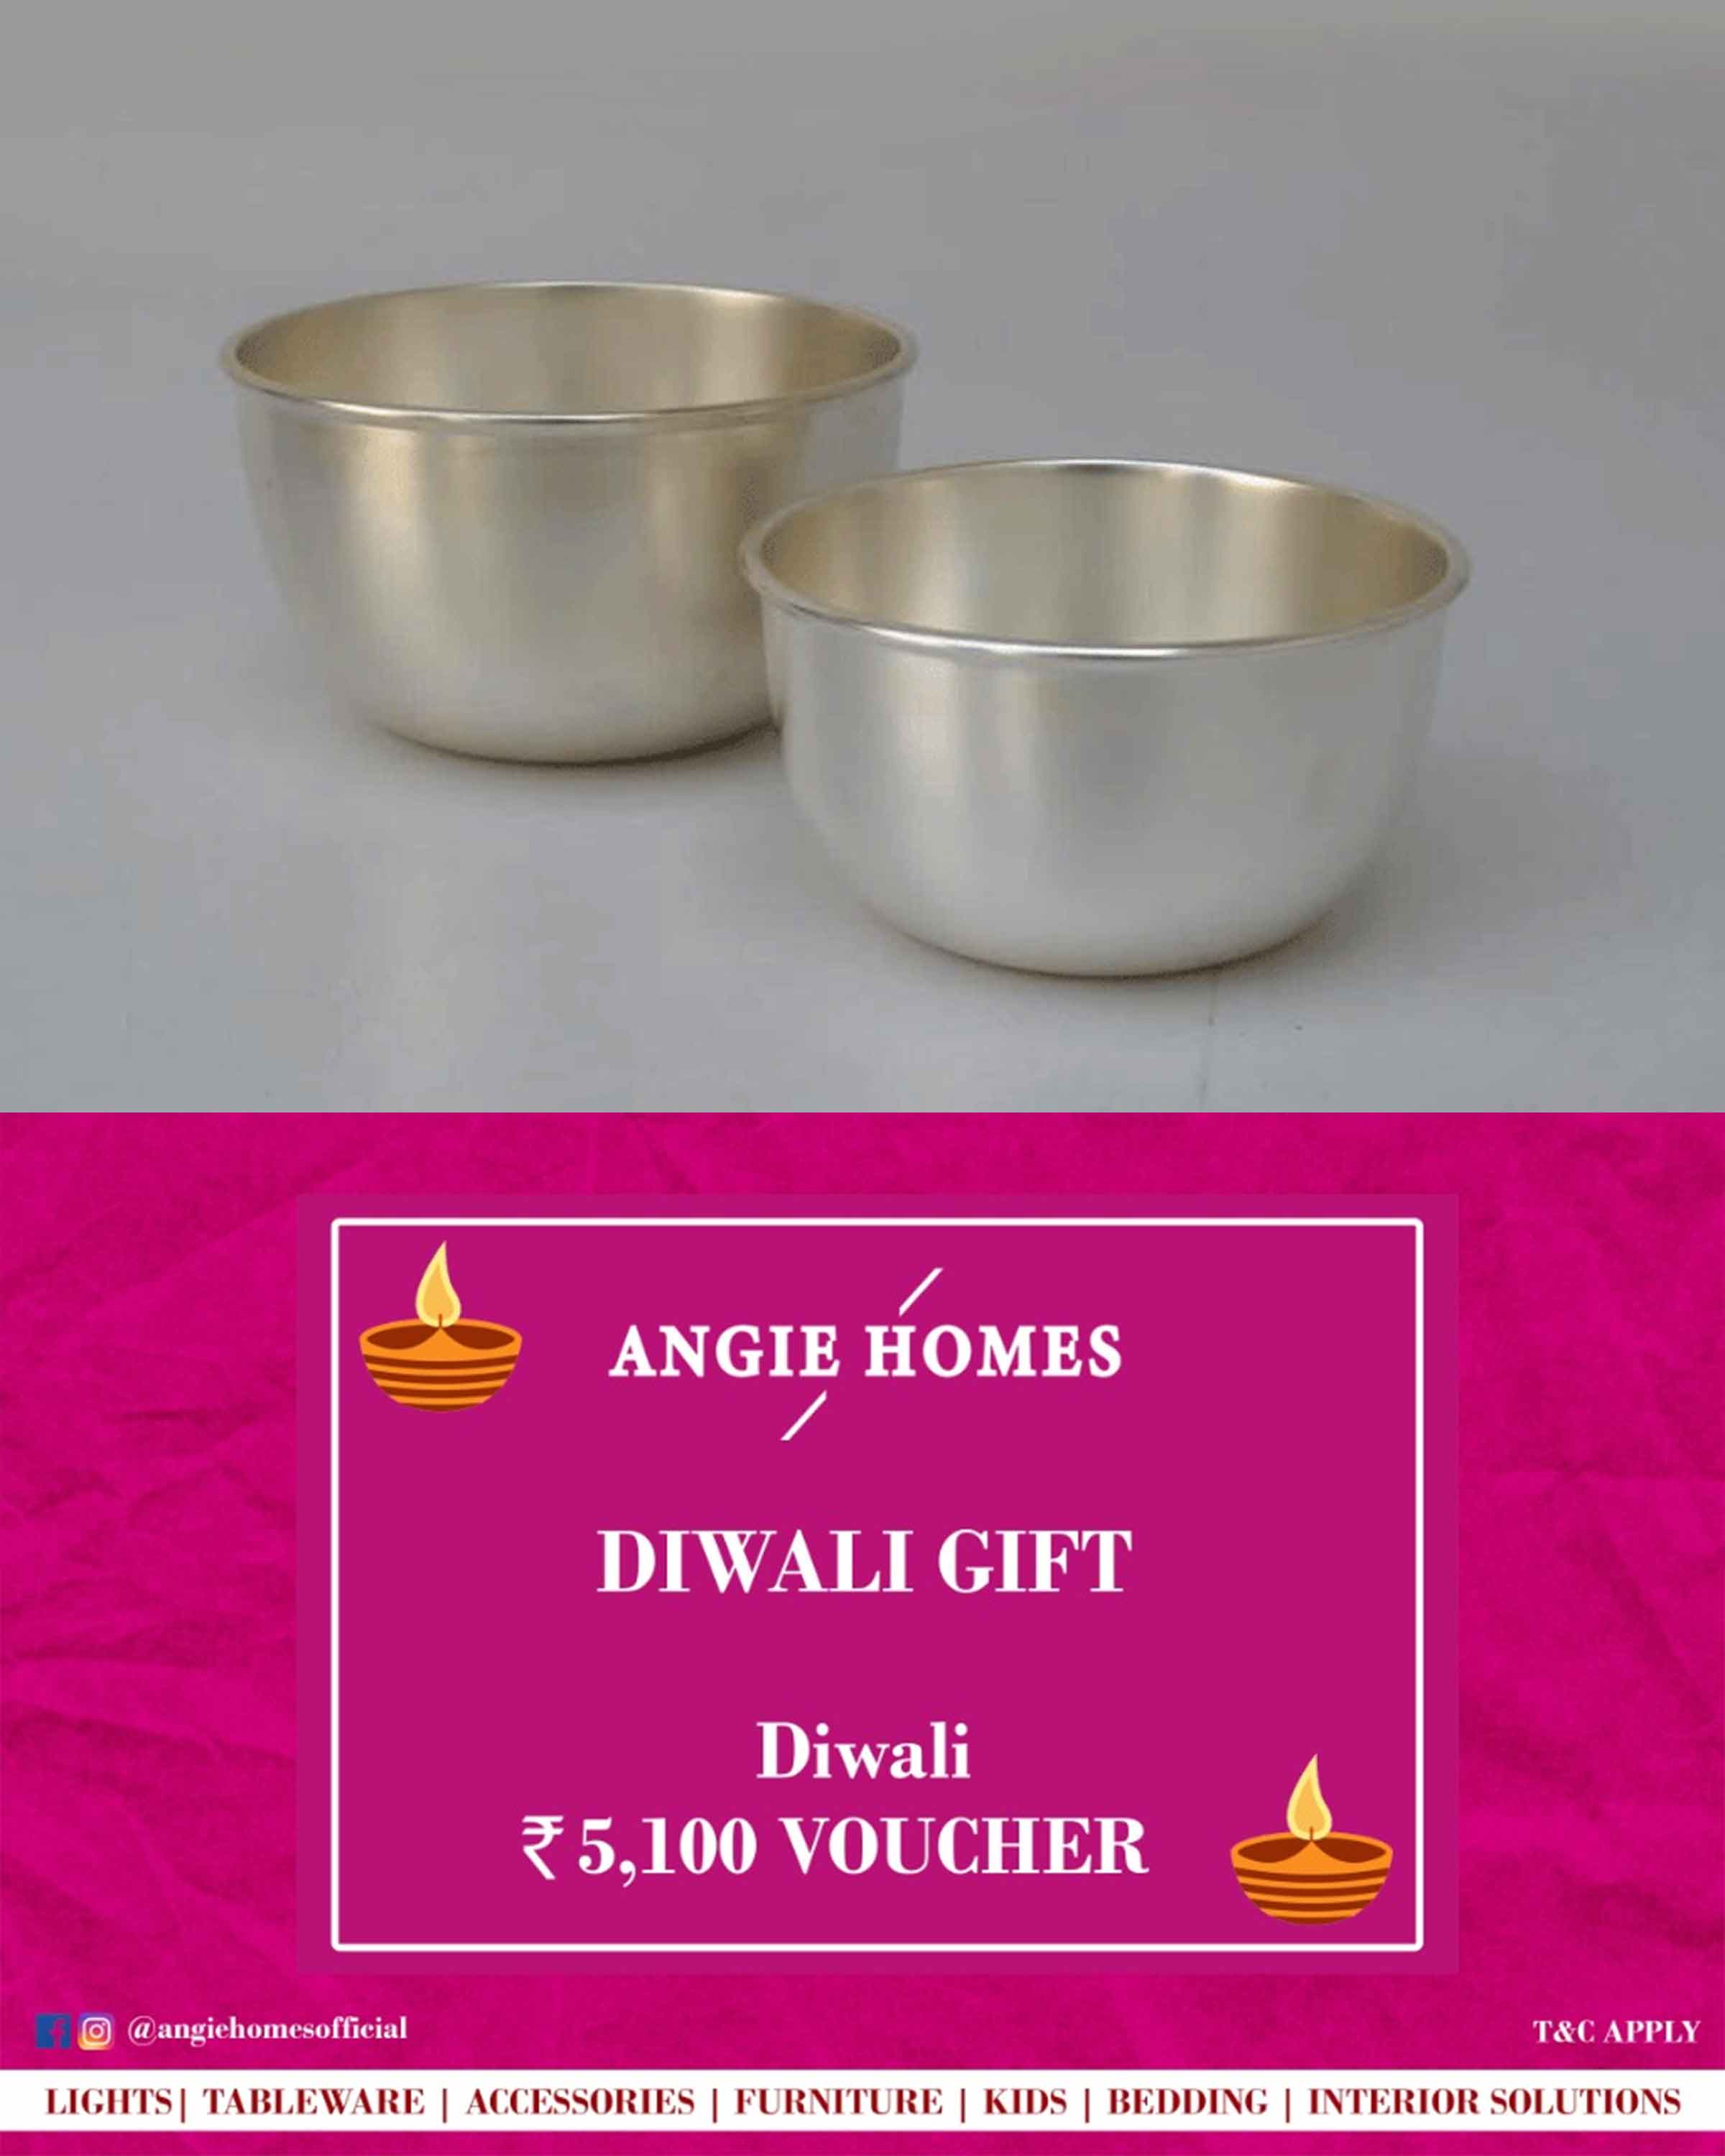 Online Diwali Gift Card Voucher for Silver Plated Bowl Set | Serveware ANGIE HOMES